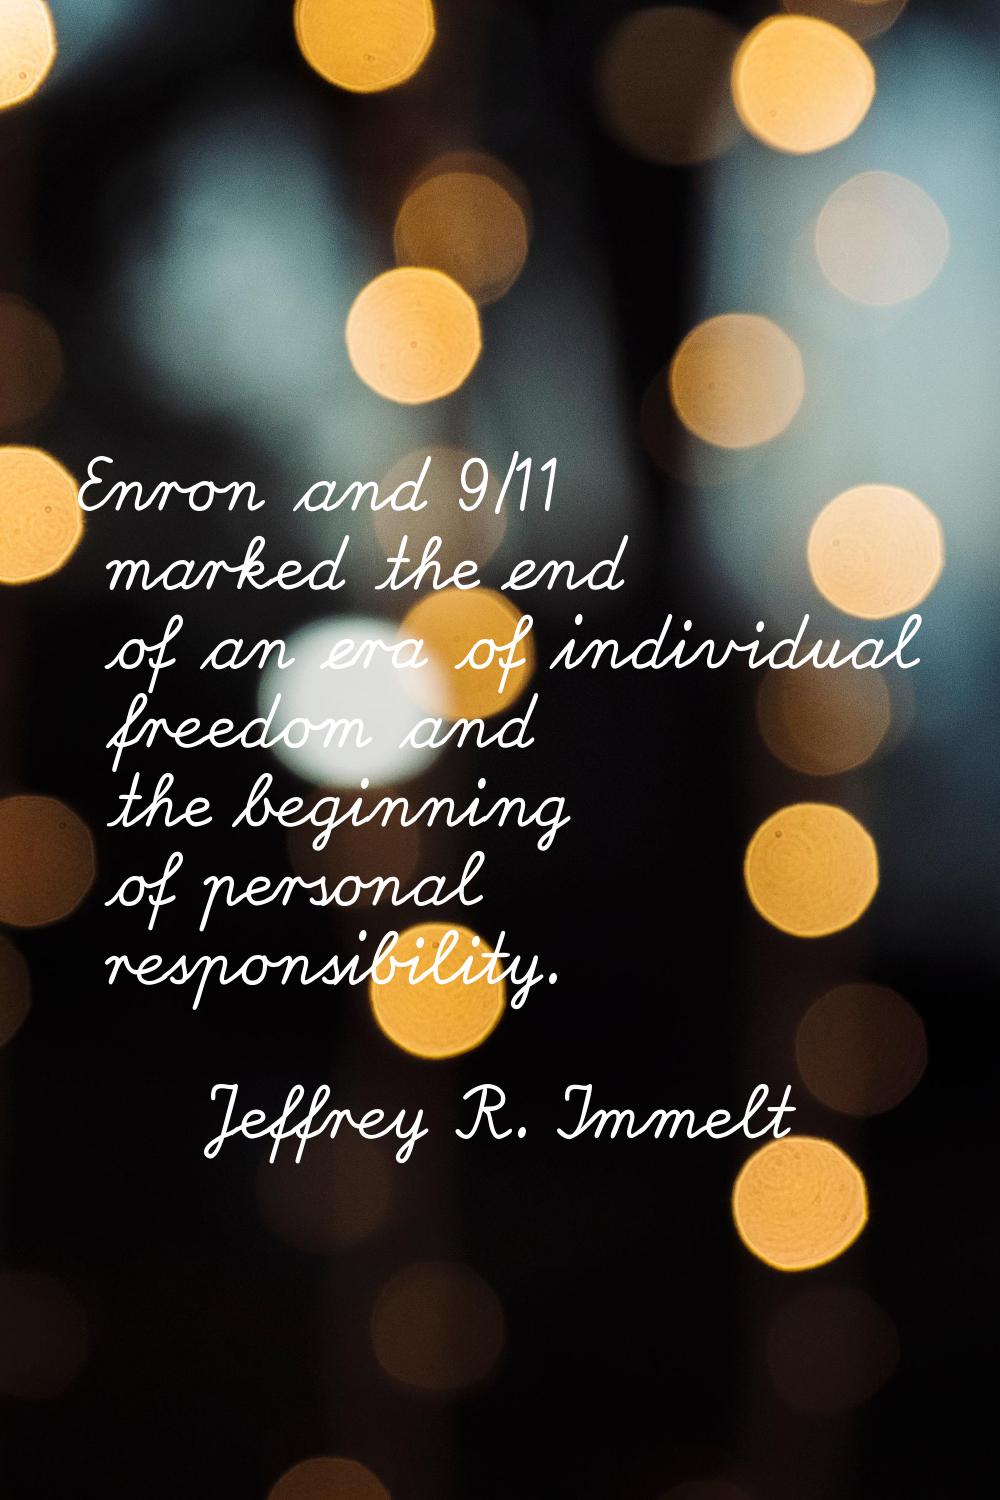 Enron and 9/11 marked the end of an era of individual freedom and the beginning of personal respons